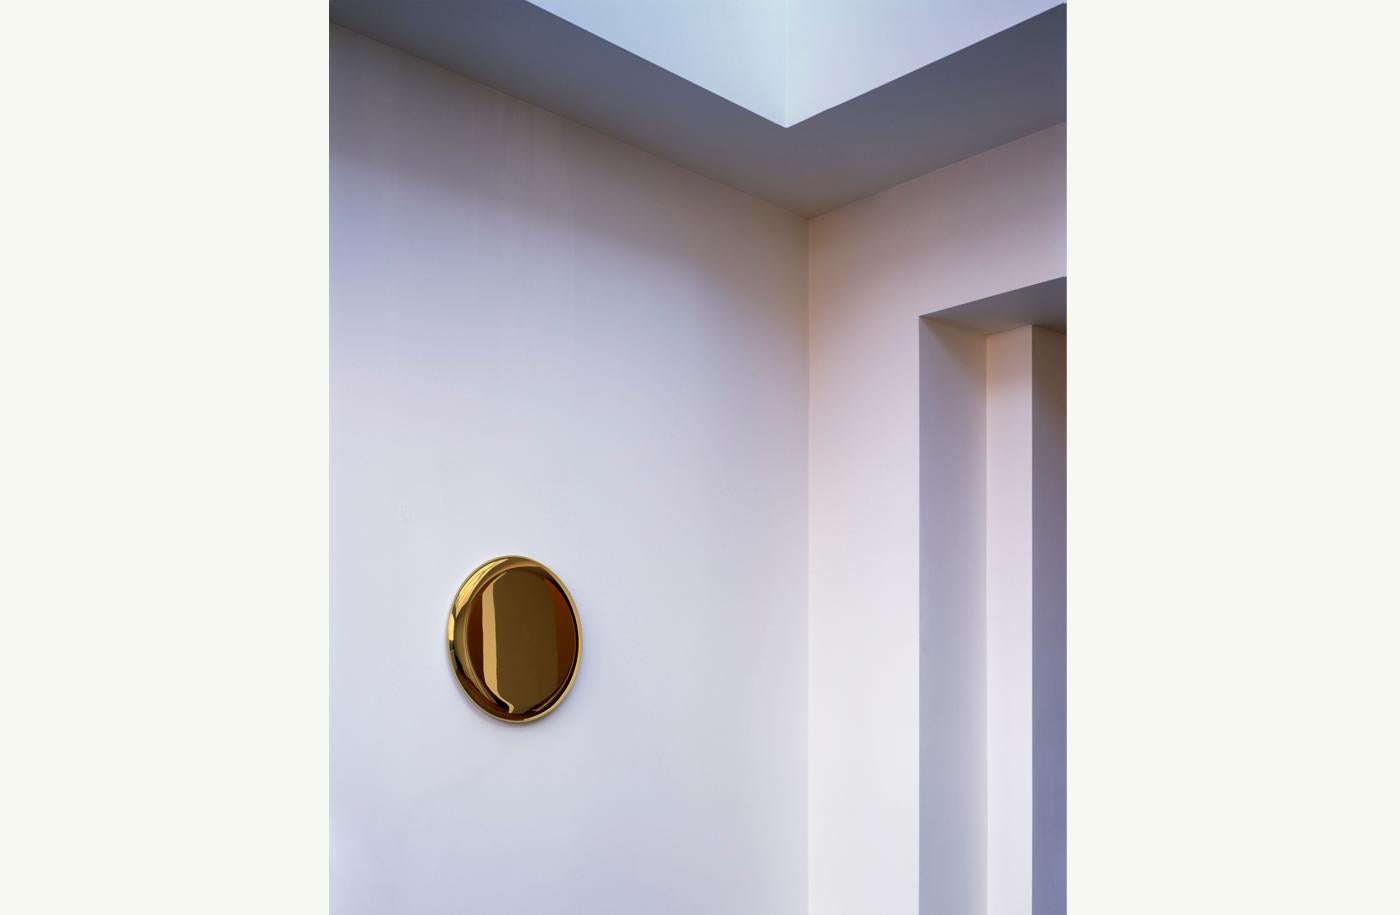 Handmade, the Beauty mirror in Polished Brass is a special jwel to hang on your wall. Warmly reflective, the Beauty mirror is honest to its material which is integral to the work of artist Michael Anastassiades.
  